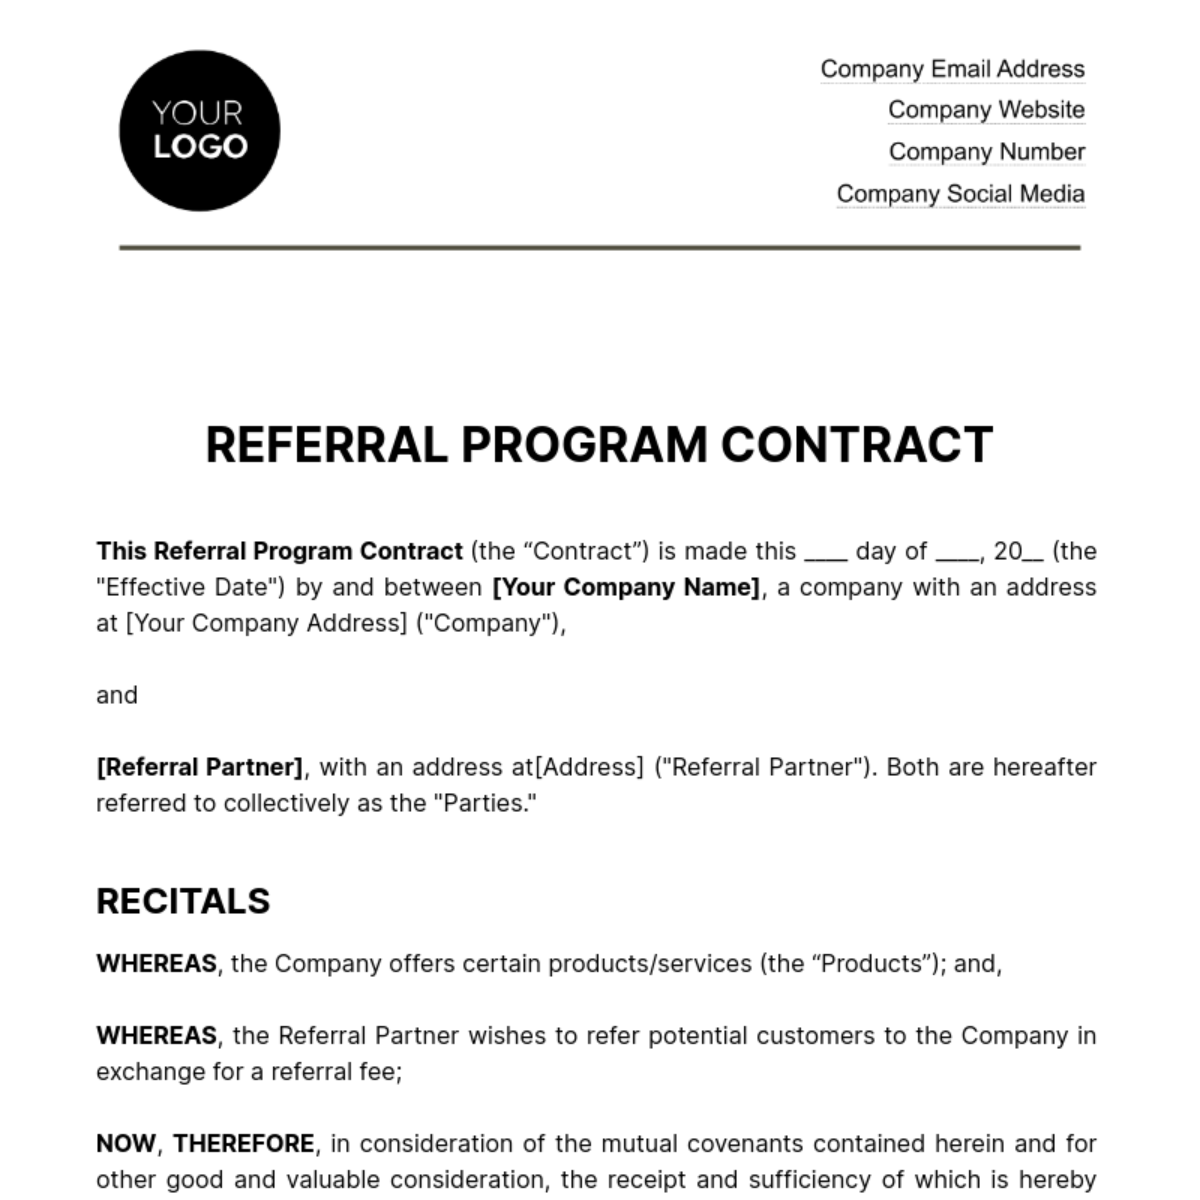 Referral Program Contract HR Template